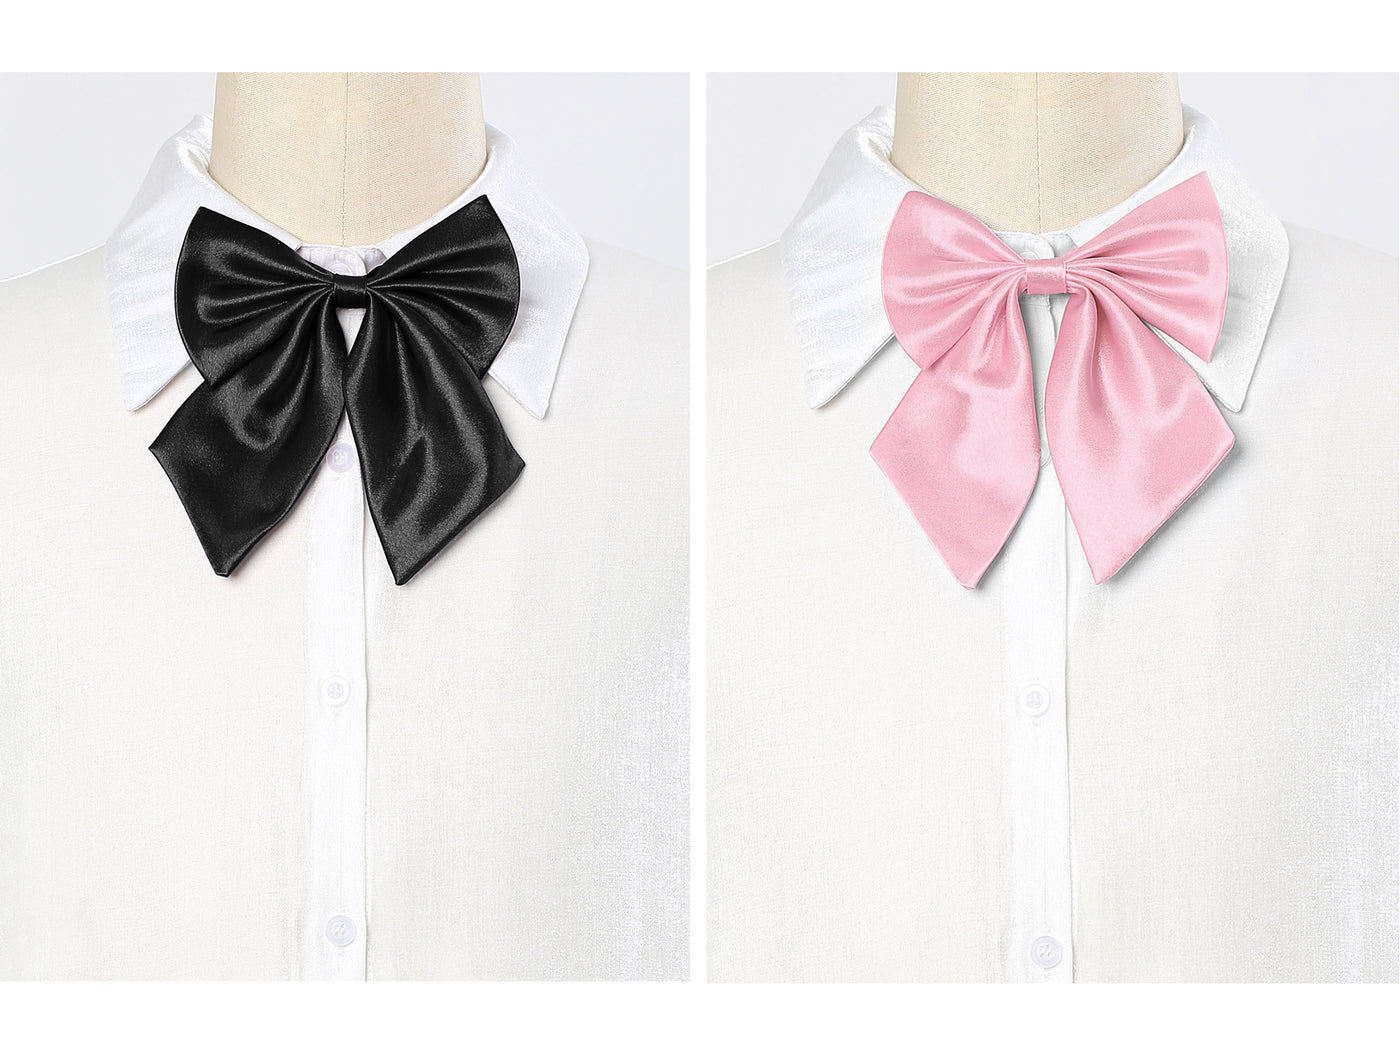 Allegra K Pre-tied Bowknot with Adjustable Neck Strap Cute Bowtie 2 Pcs